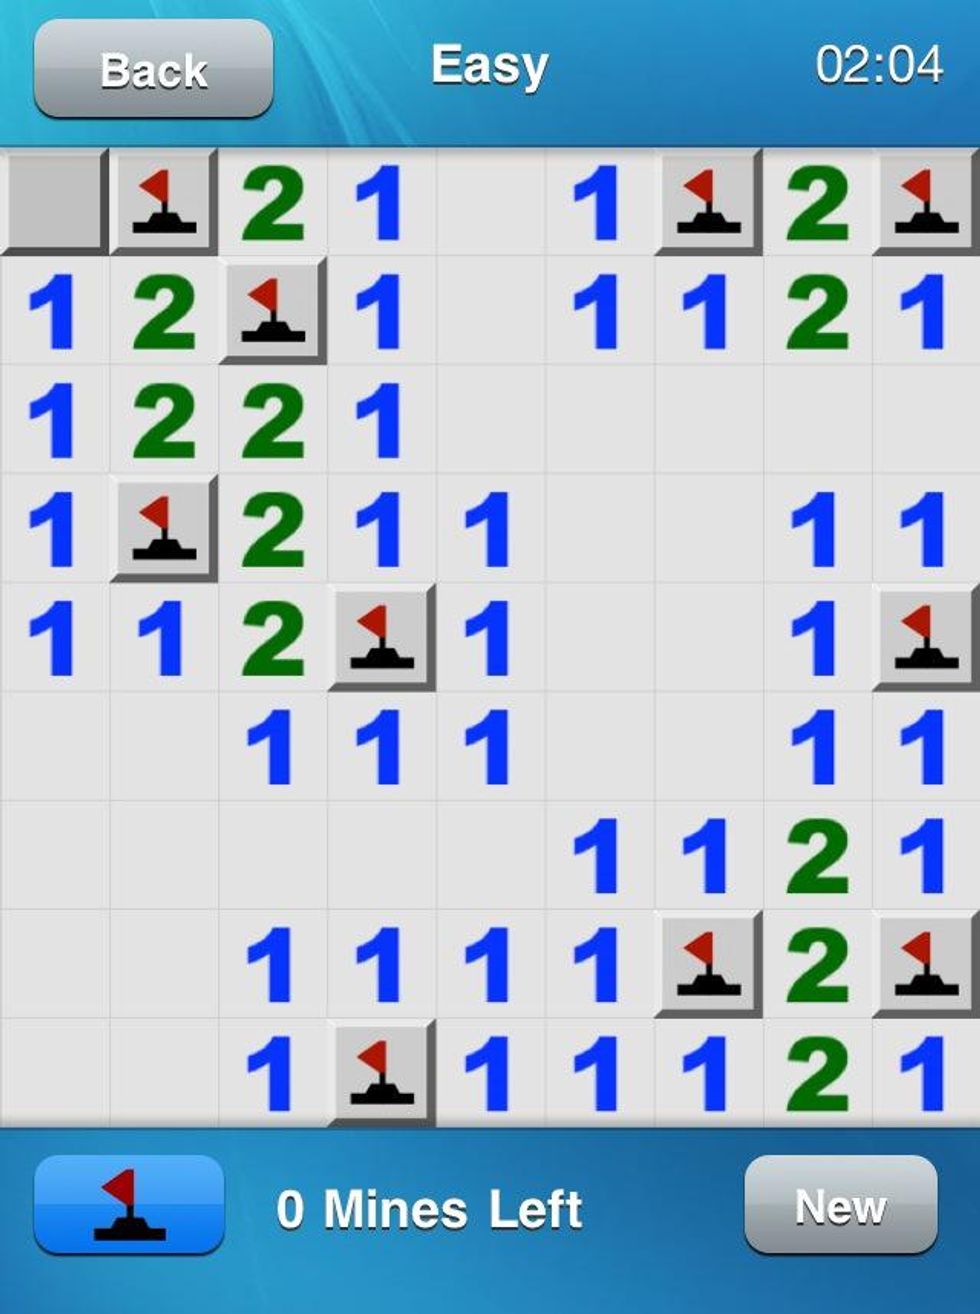 How to play minesweeper - B+C Guides